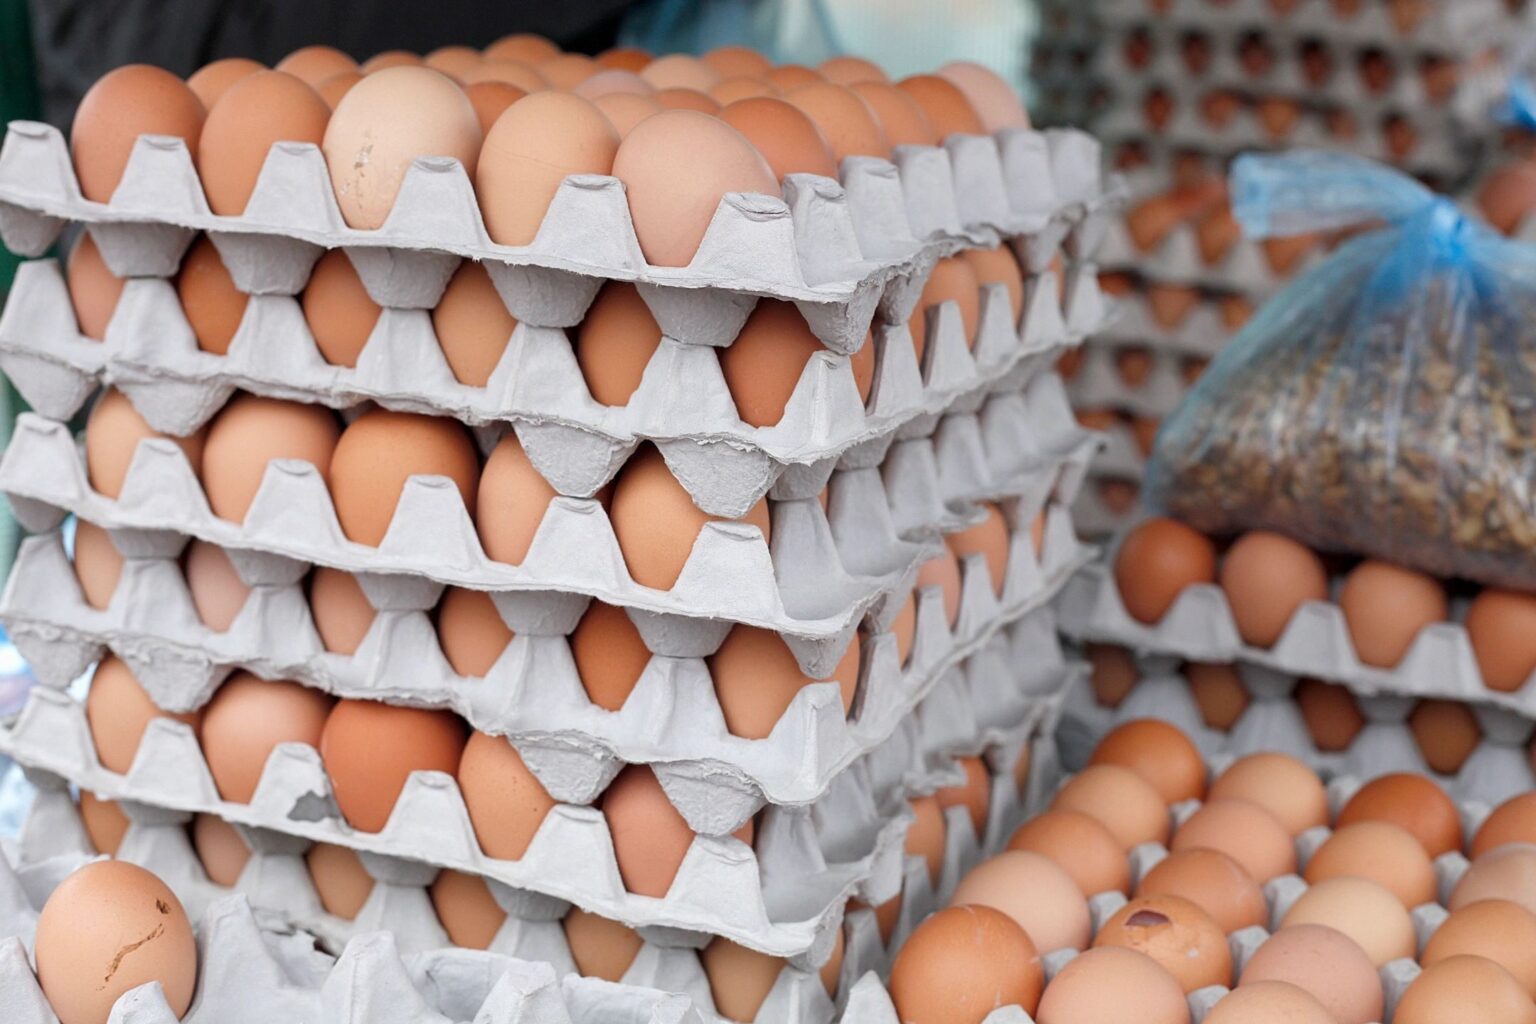 Save $3000 by Eating Eggs and Making Cheaper Substitutions of Equal Convenience